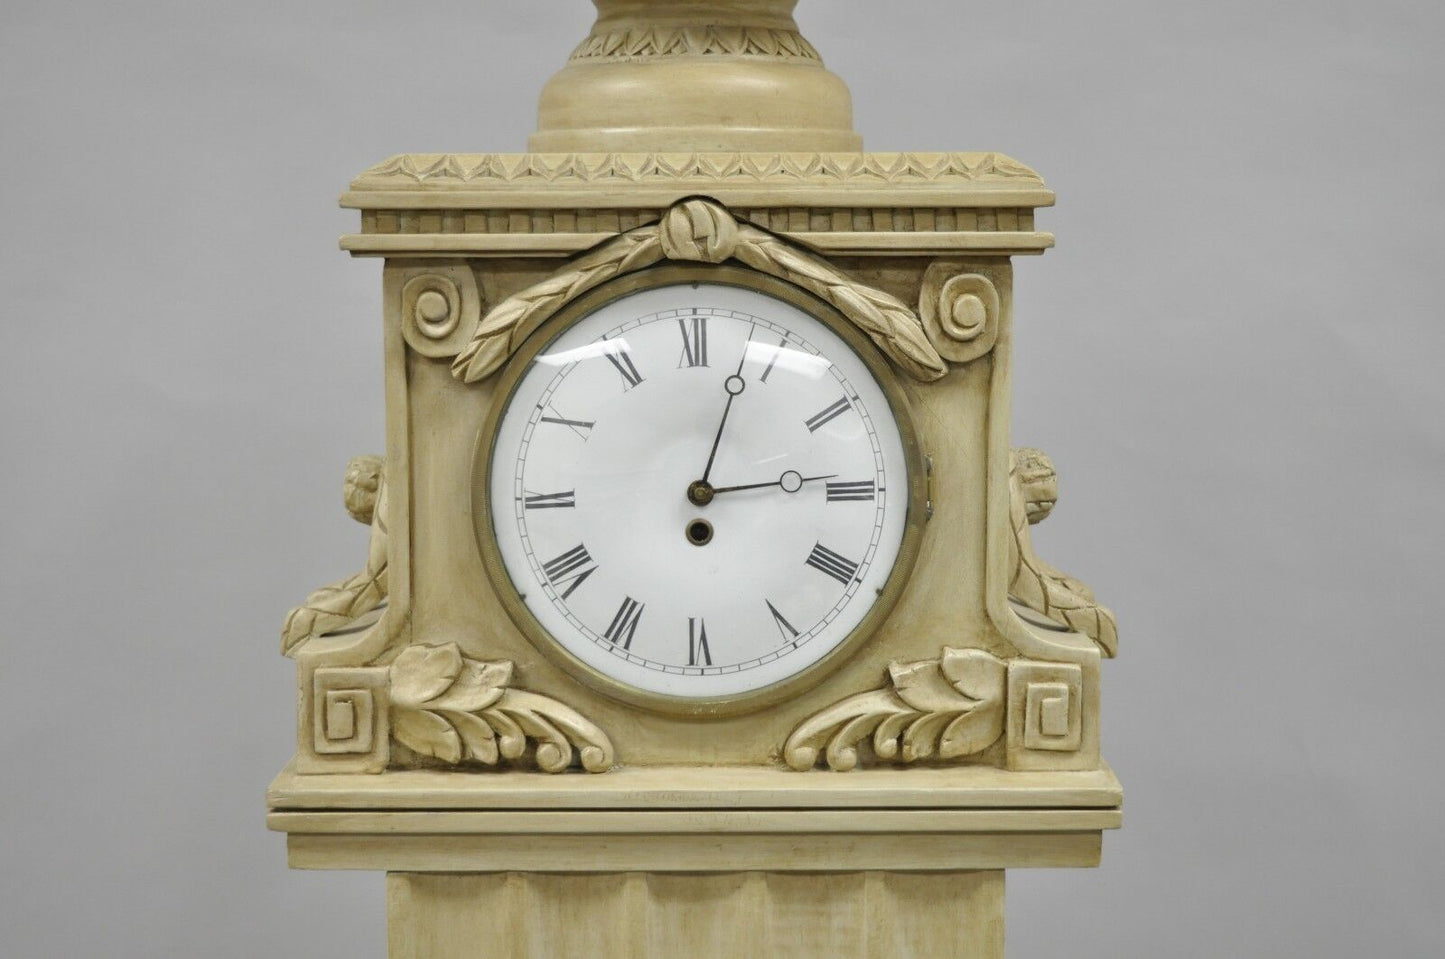 72" French Regency Empire Style Cream Painted Grandfather Case Standing Clock